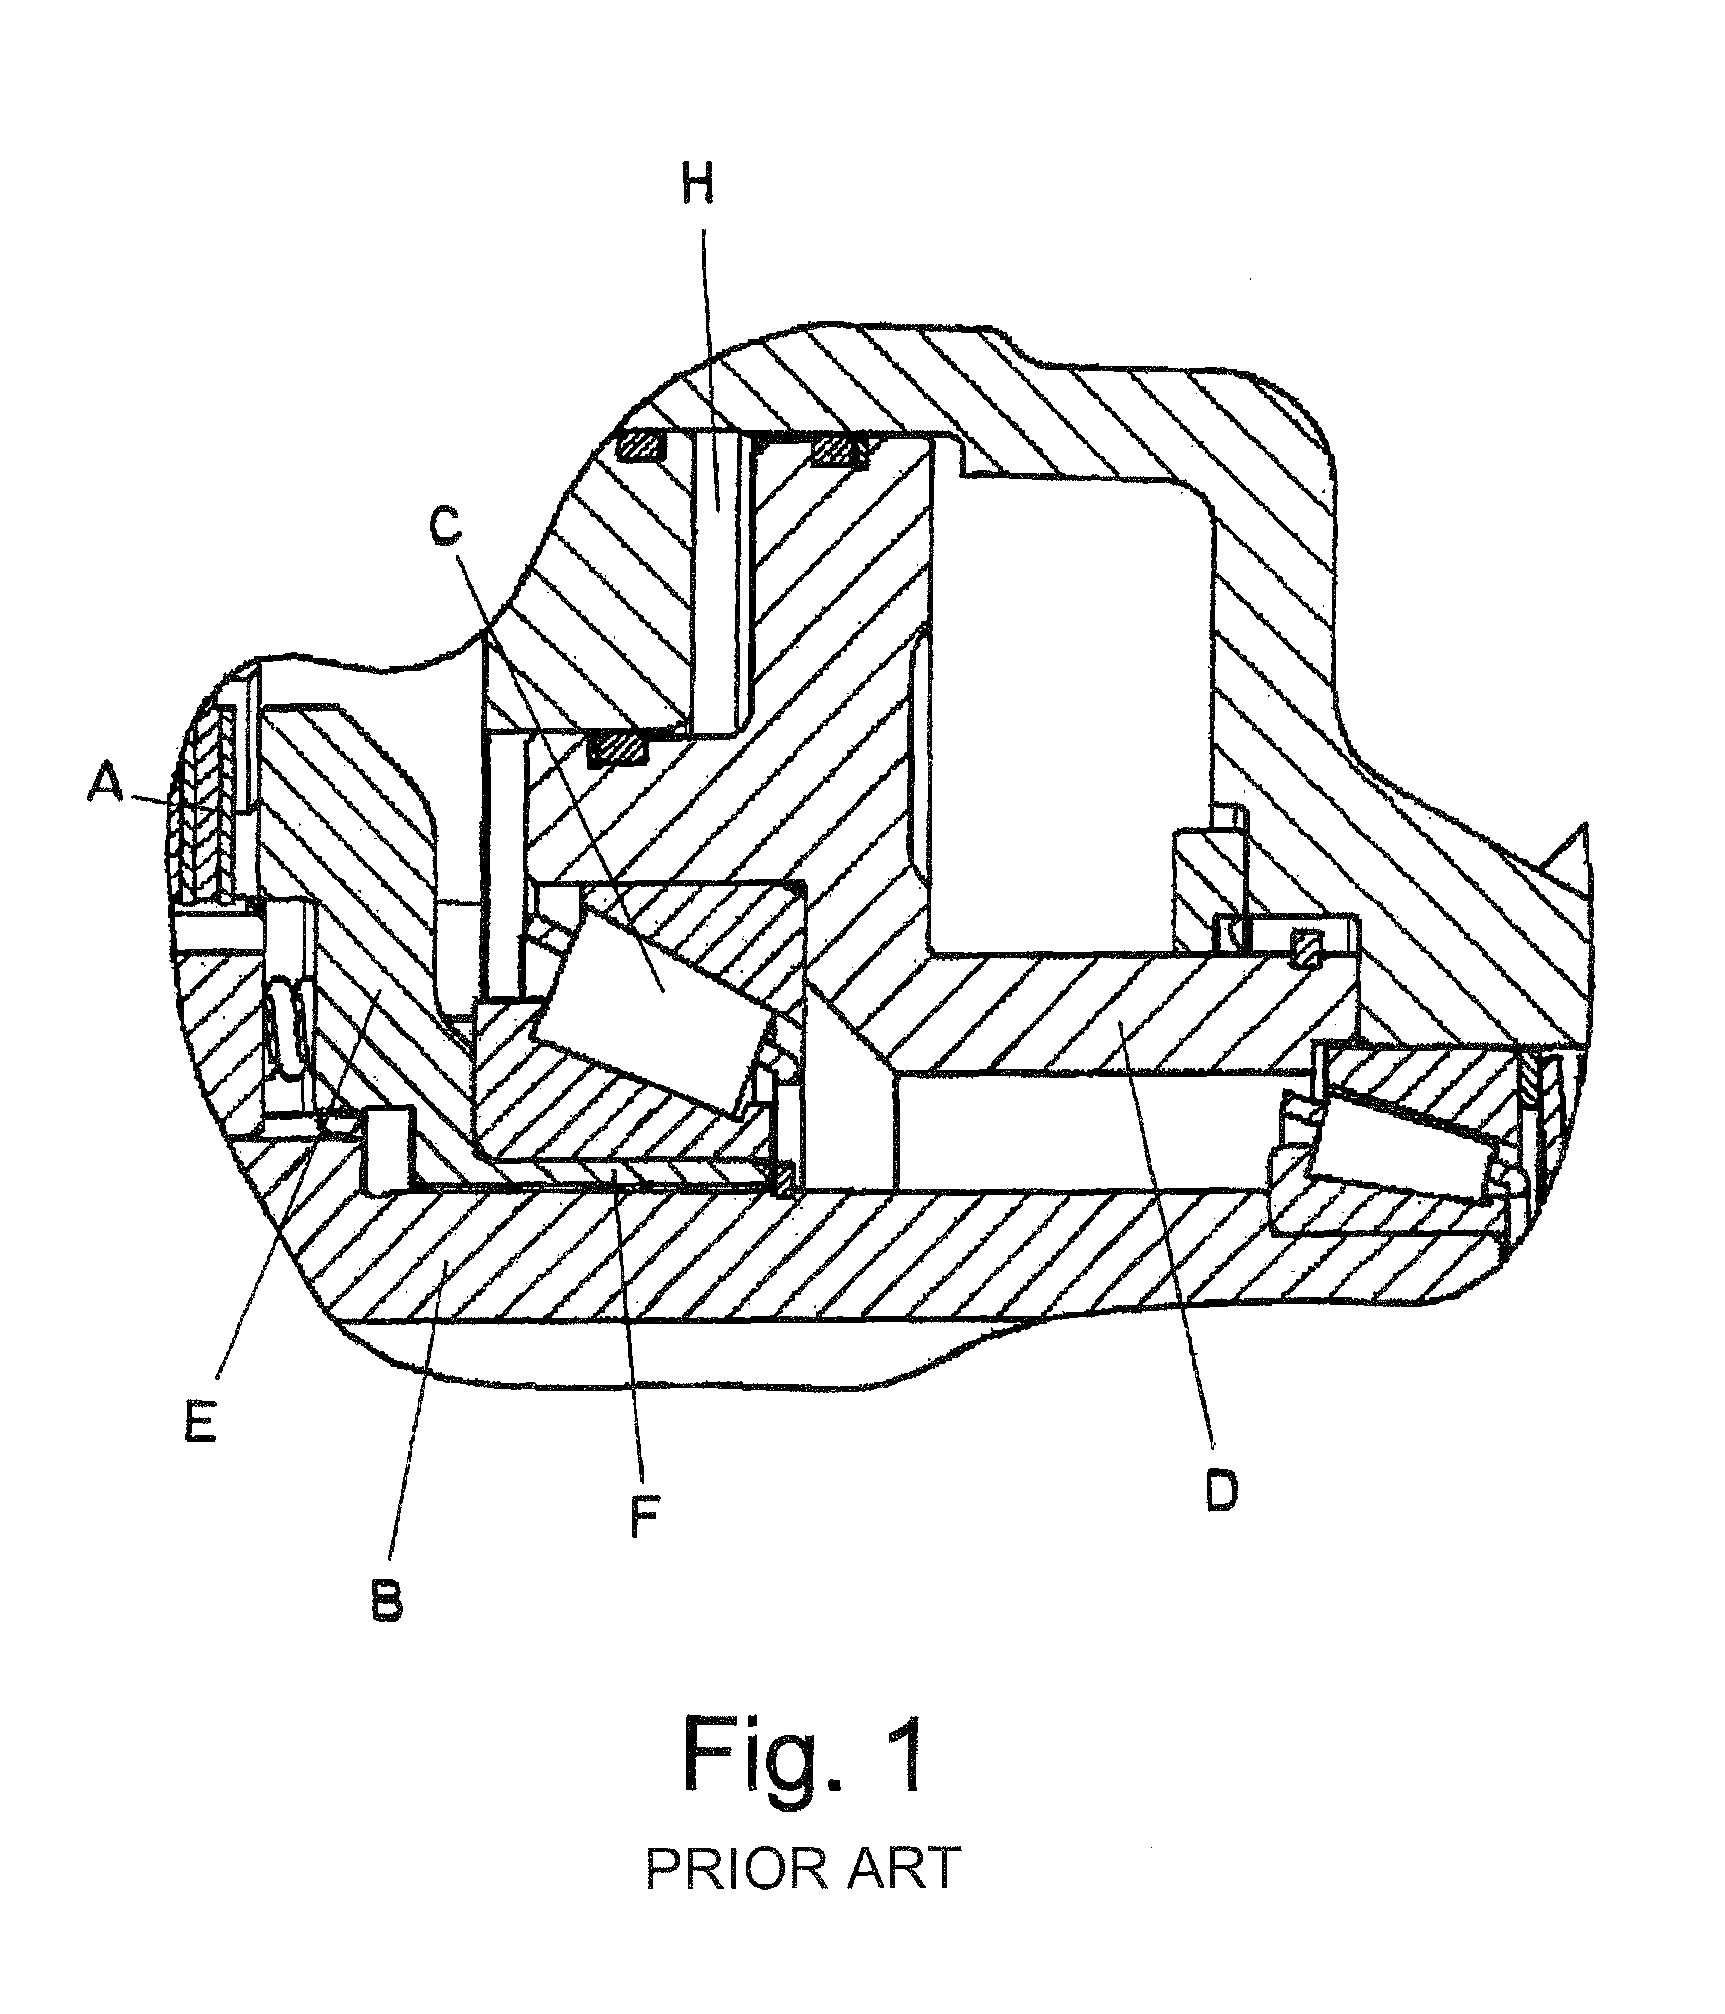 Drive assembly for a clutch unit and removable transmission equipped with said assembly